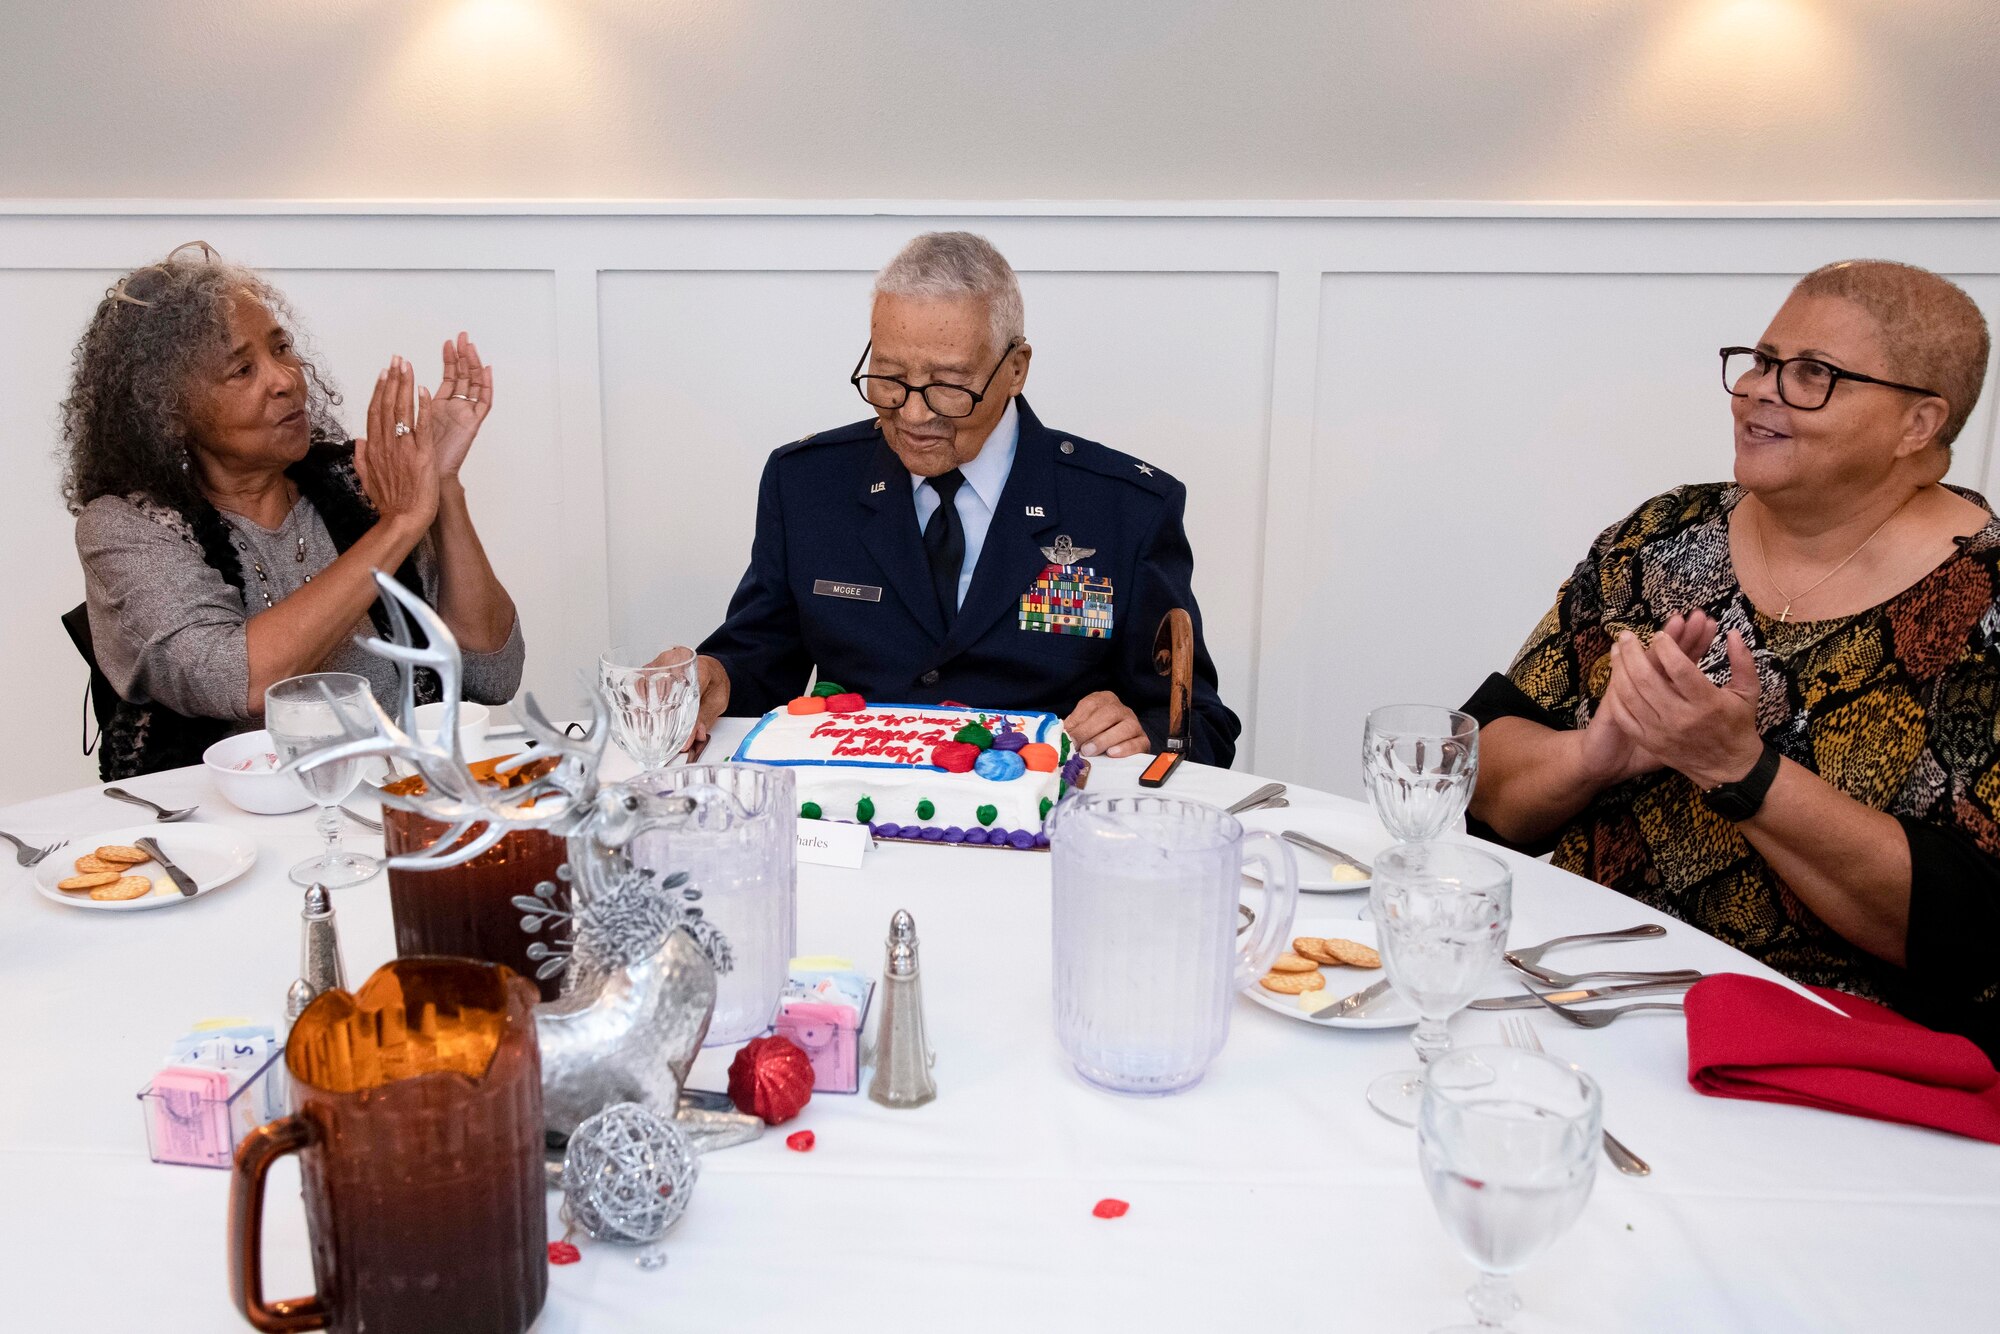 Man in Air Force uniform looking at a birthday cake. His daughters on either side of him.